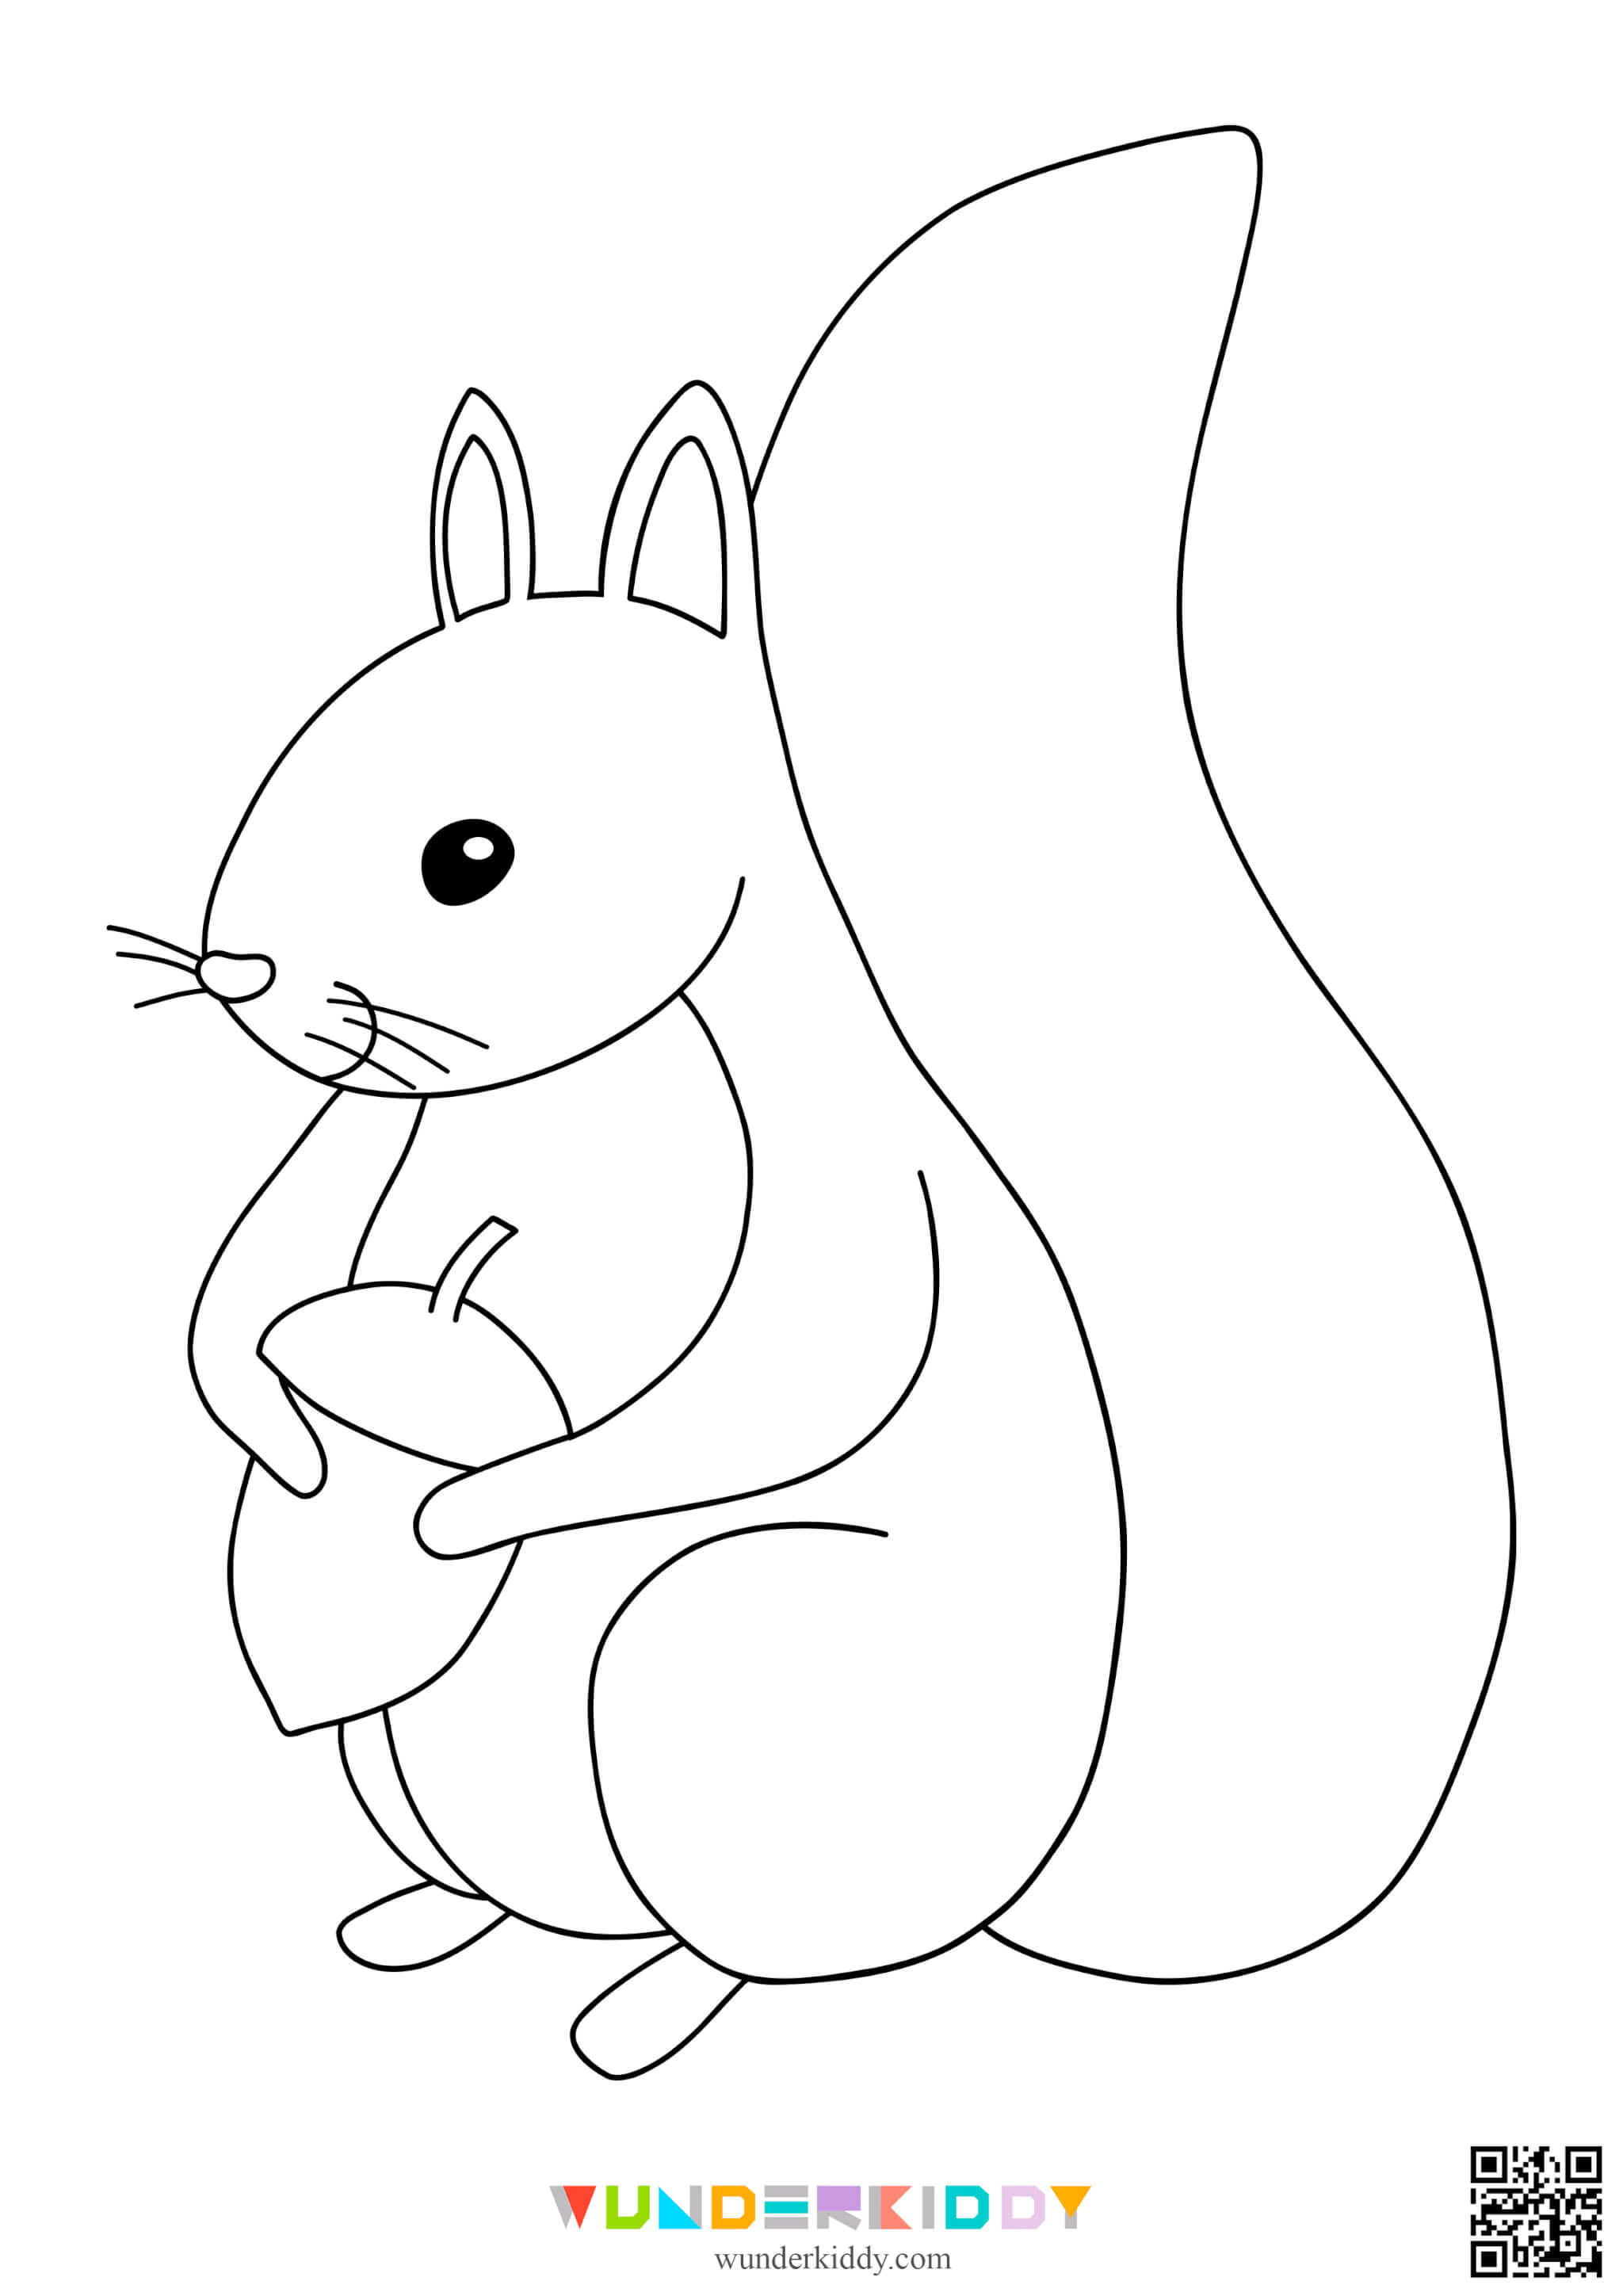 Fall Coloring Pages - Image 14